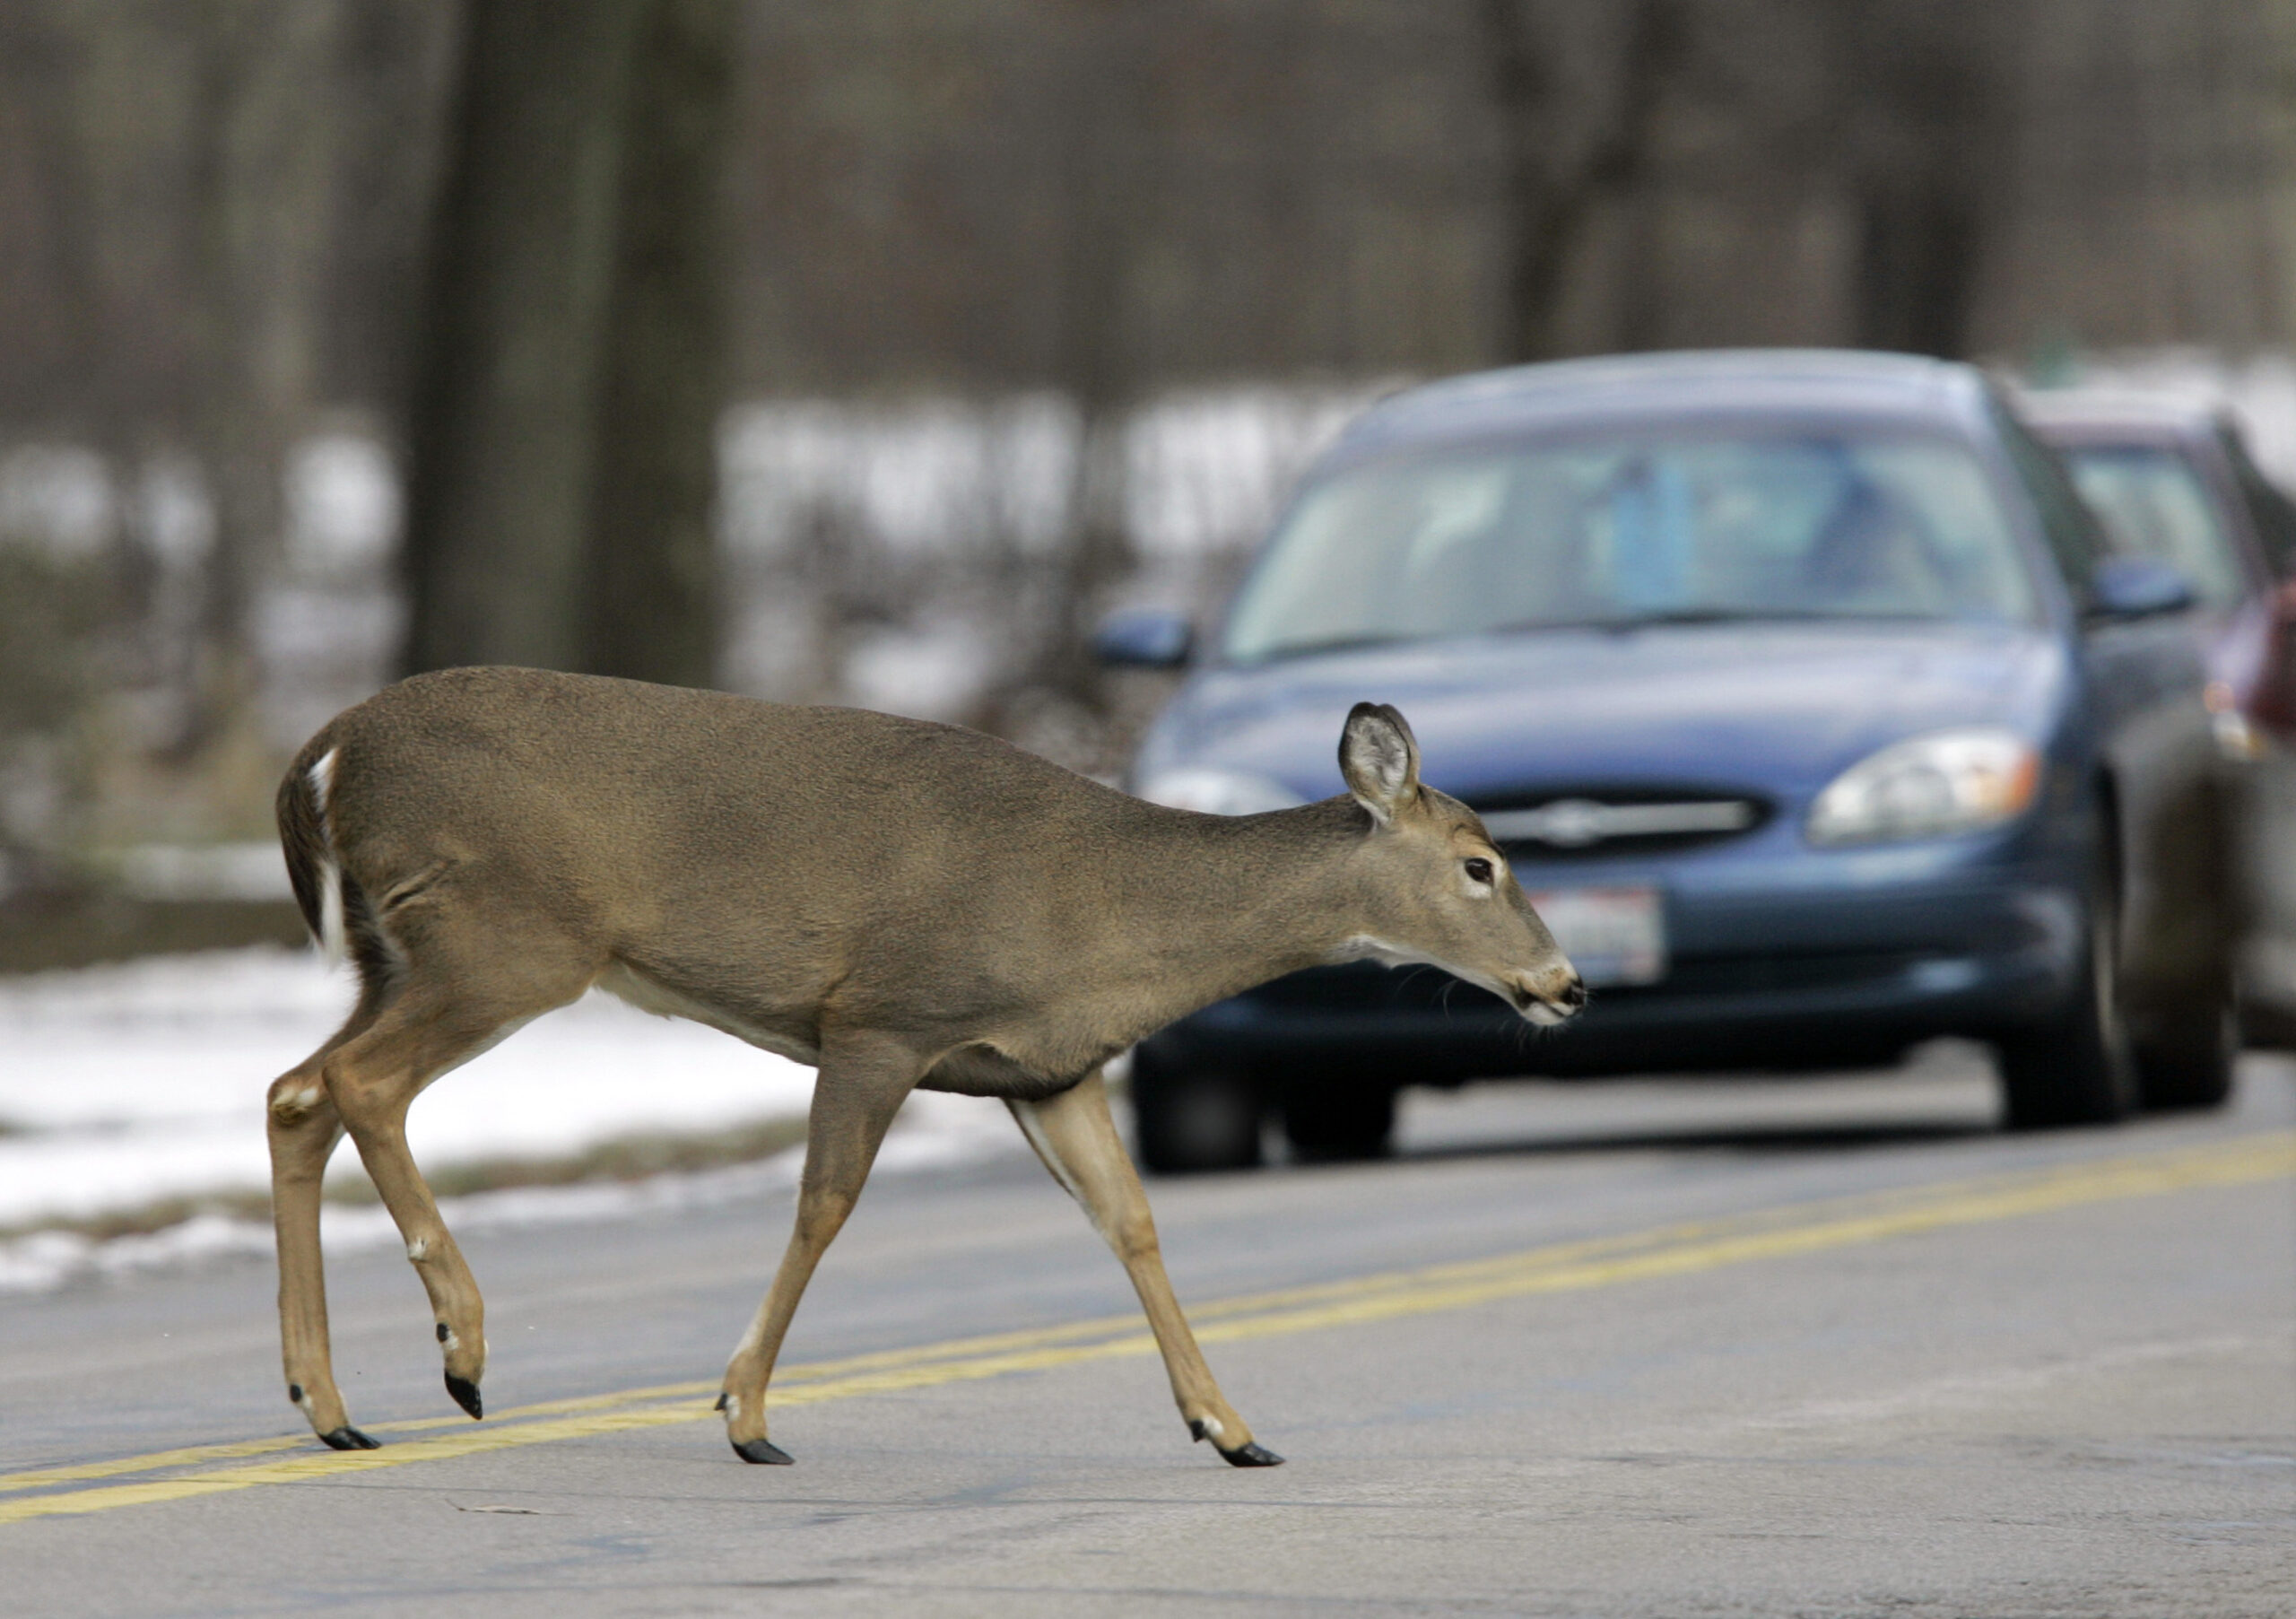 Car-deer accidents in Wisconsin in 2023 are expected to be similar to recent years